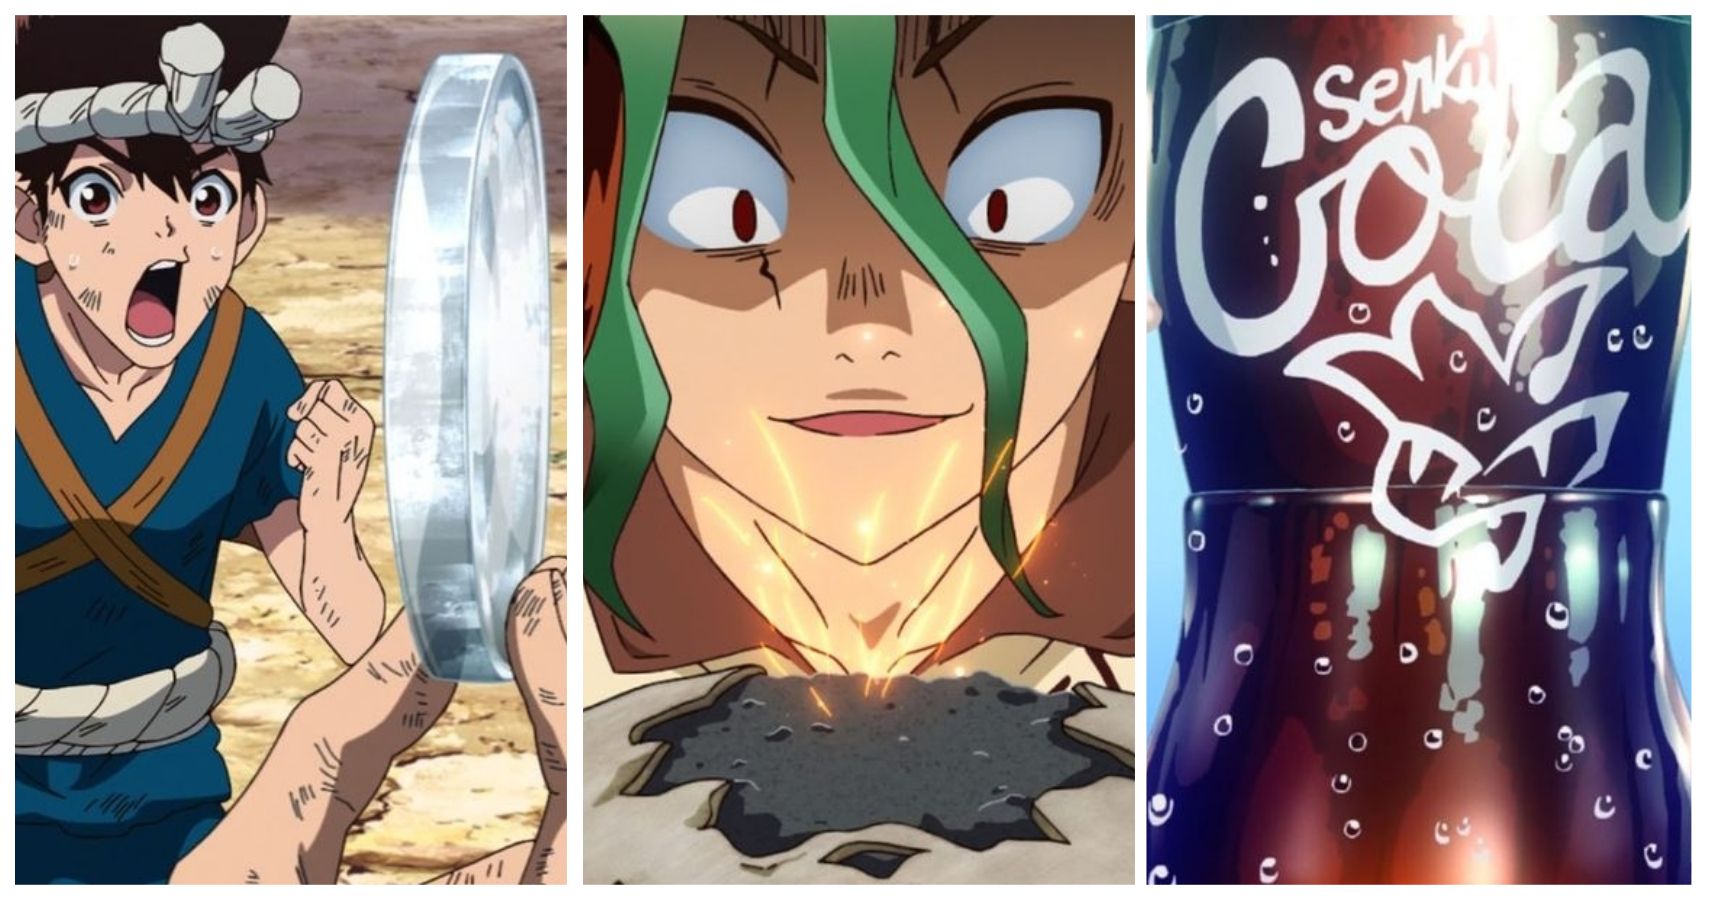 Dr Stone season 3 release date for all episodes